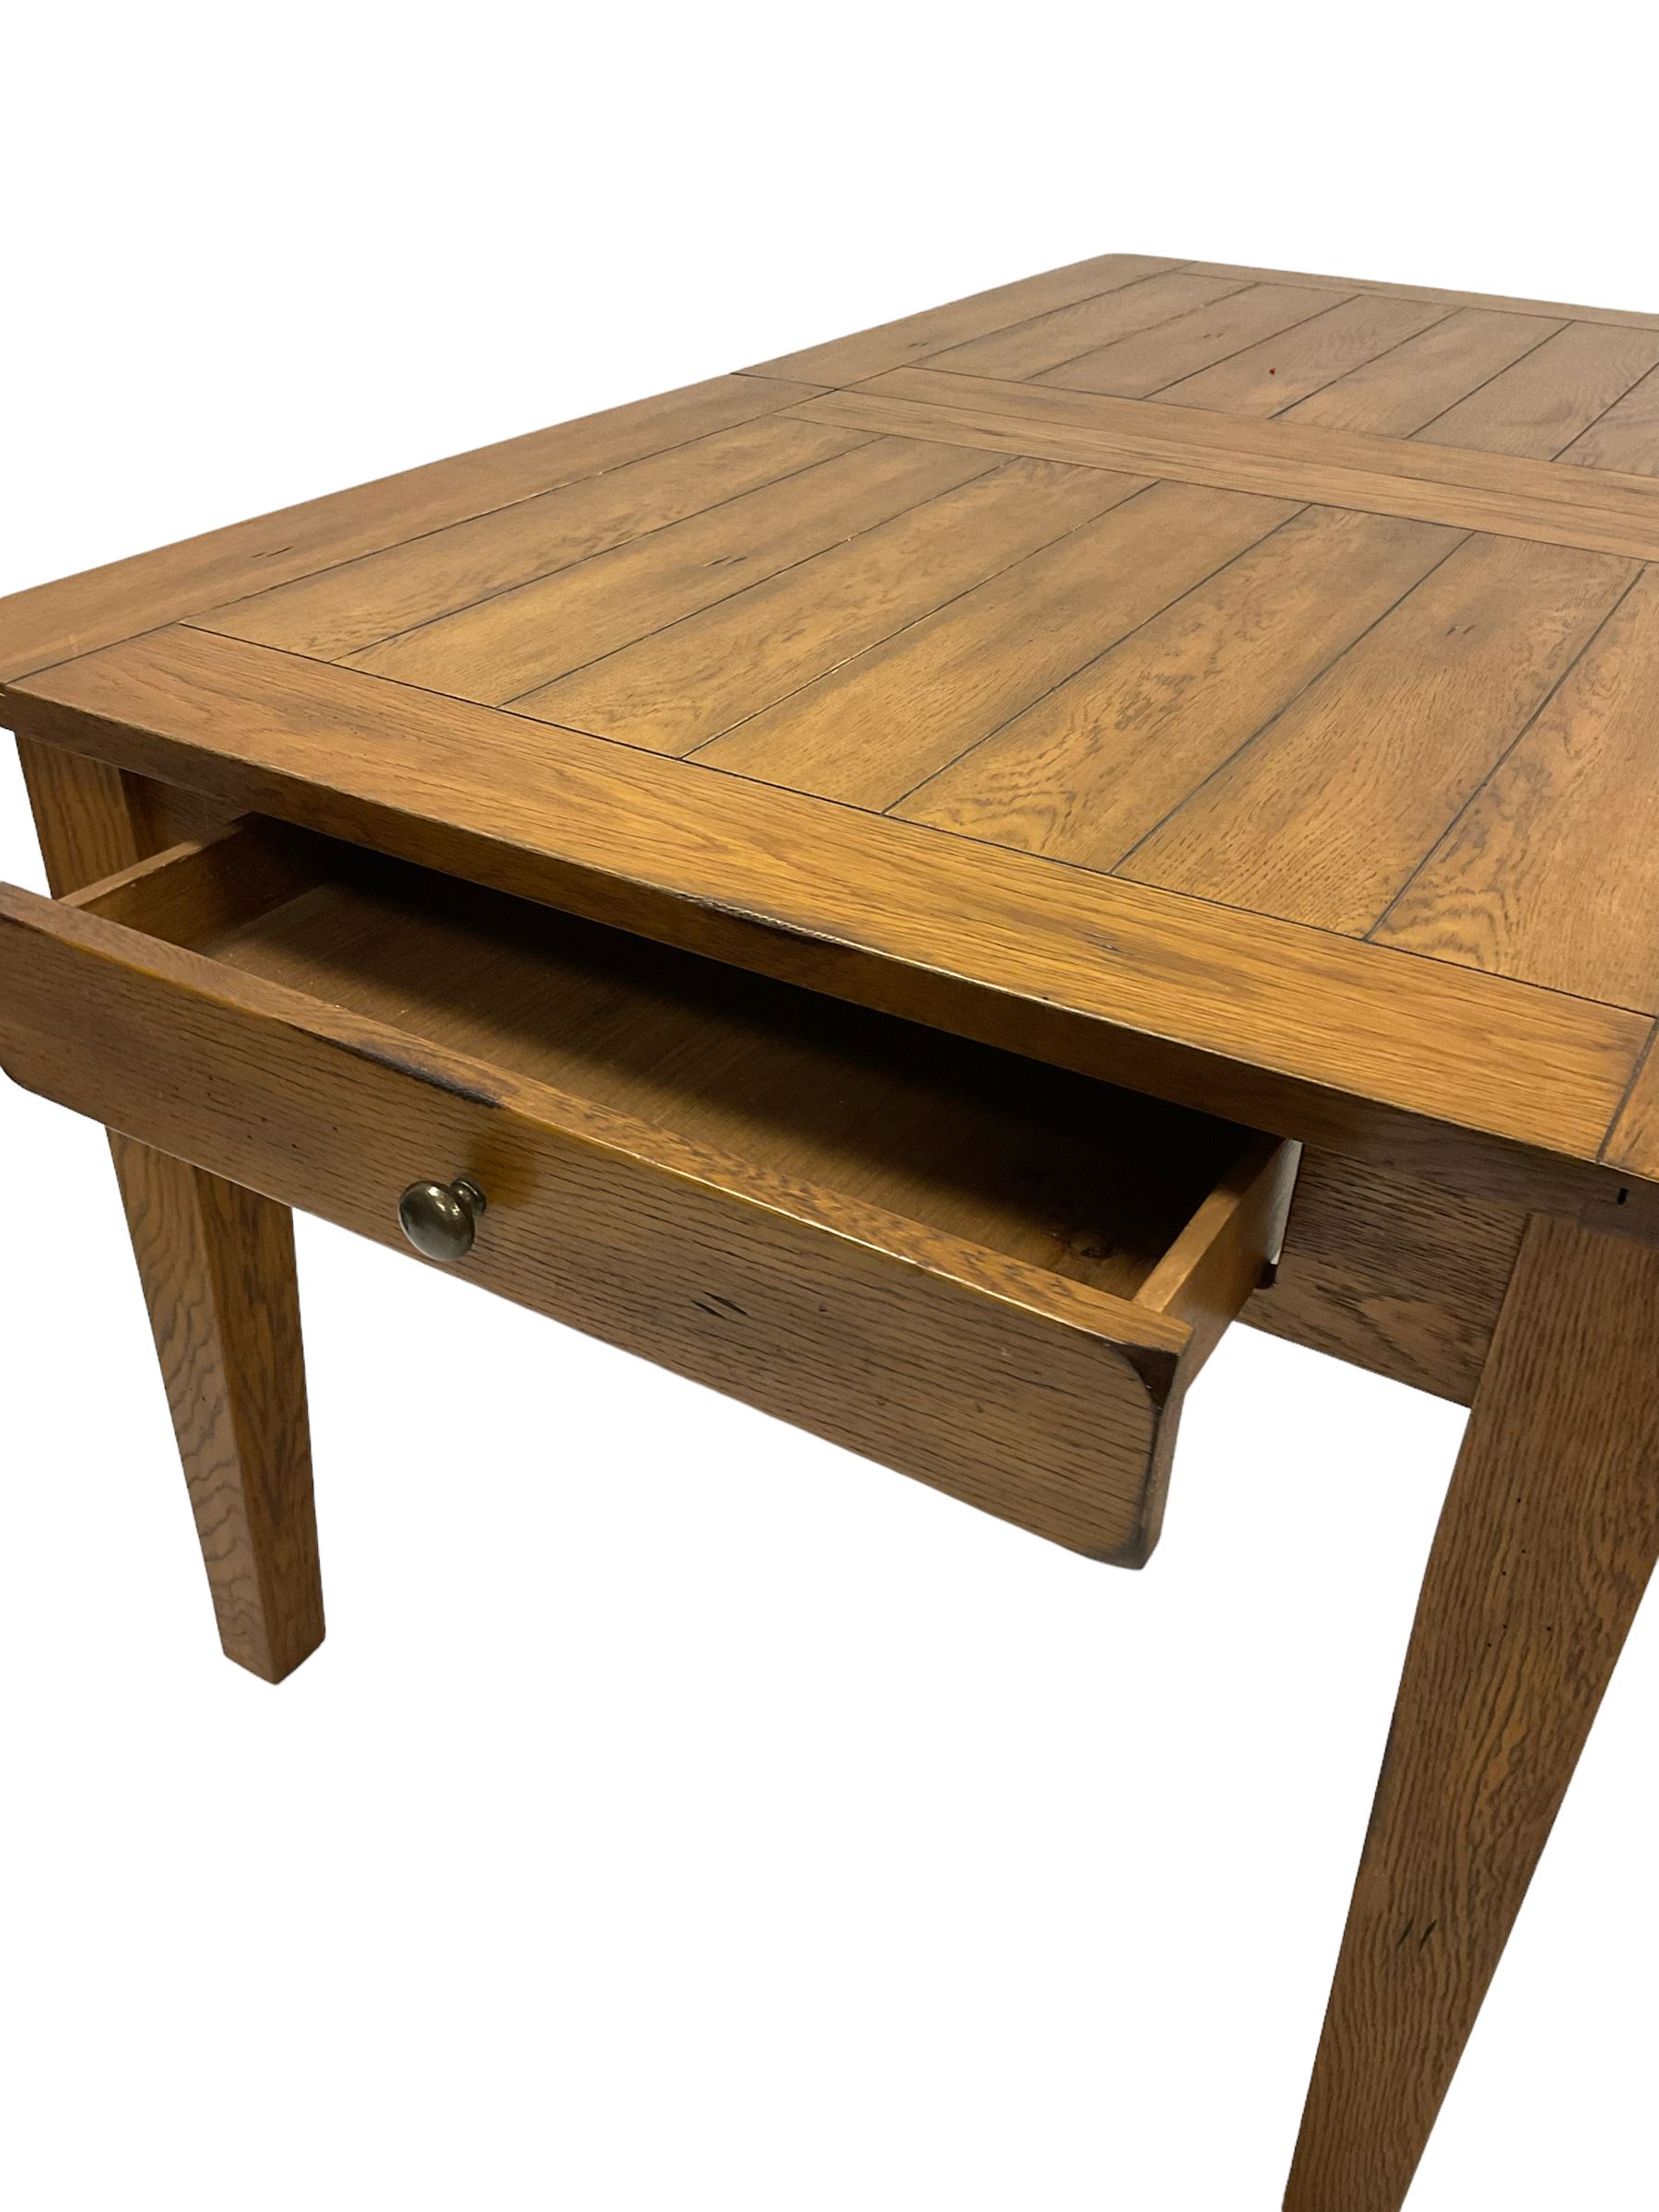 Oak dining table - Image 4 of 5